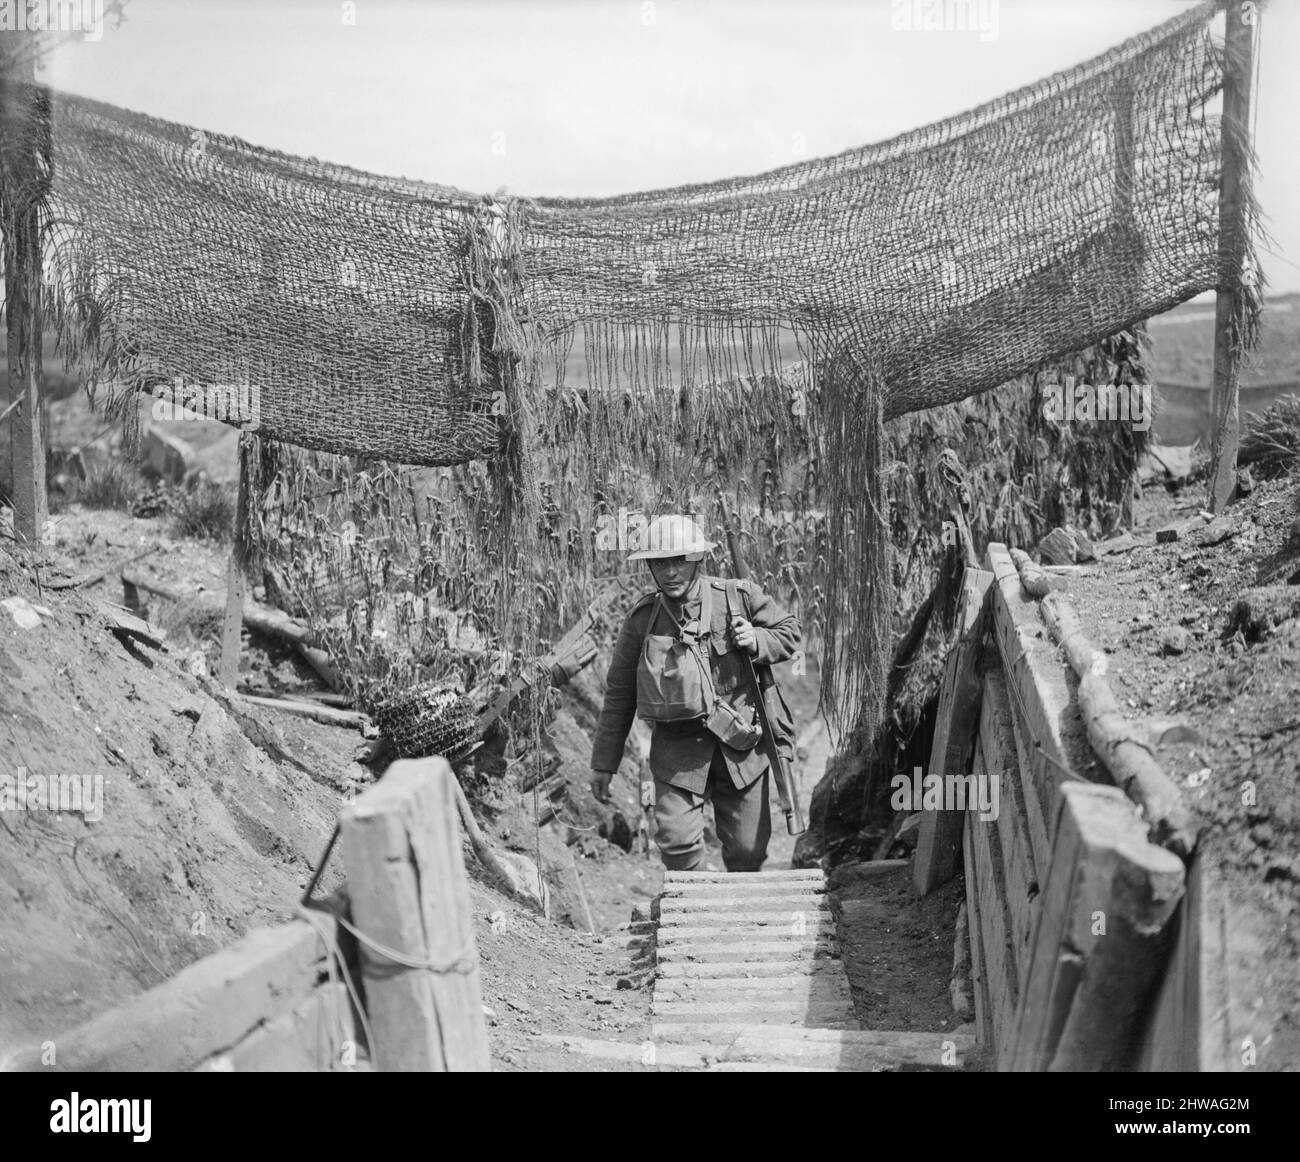 Soldier of the 20th Light Division in a communication trench with camouflage netting to prevent enemy observation in front of Lens, 14 May 1918. Stock Photo